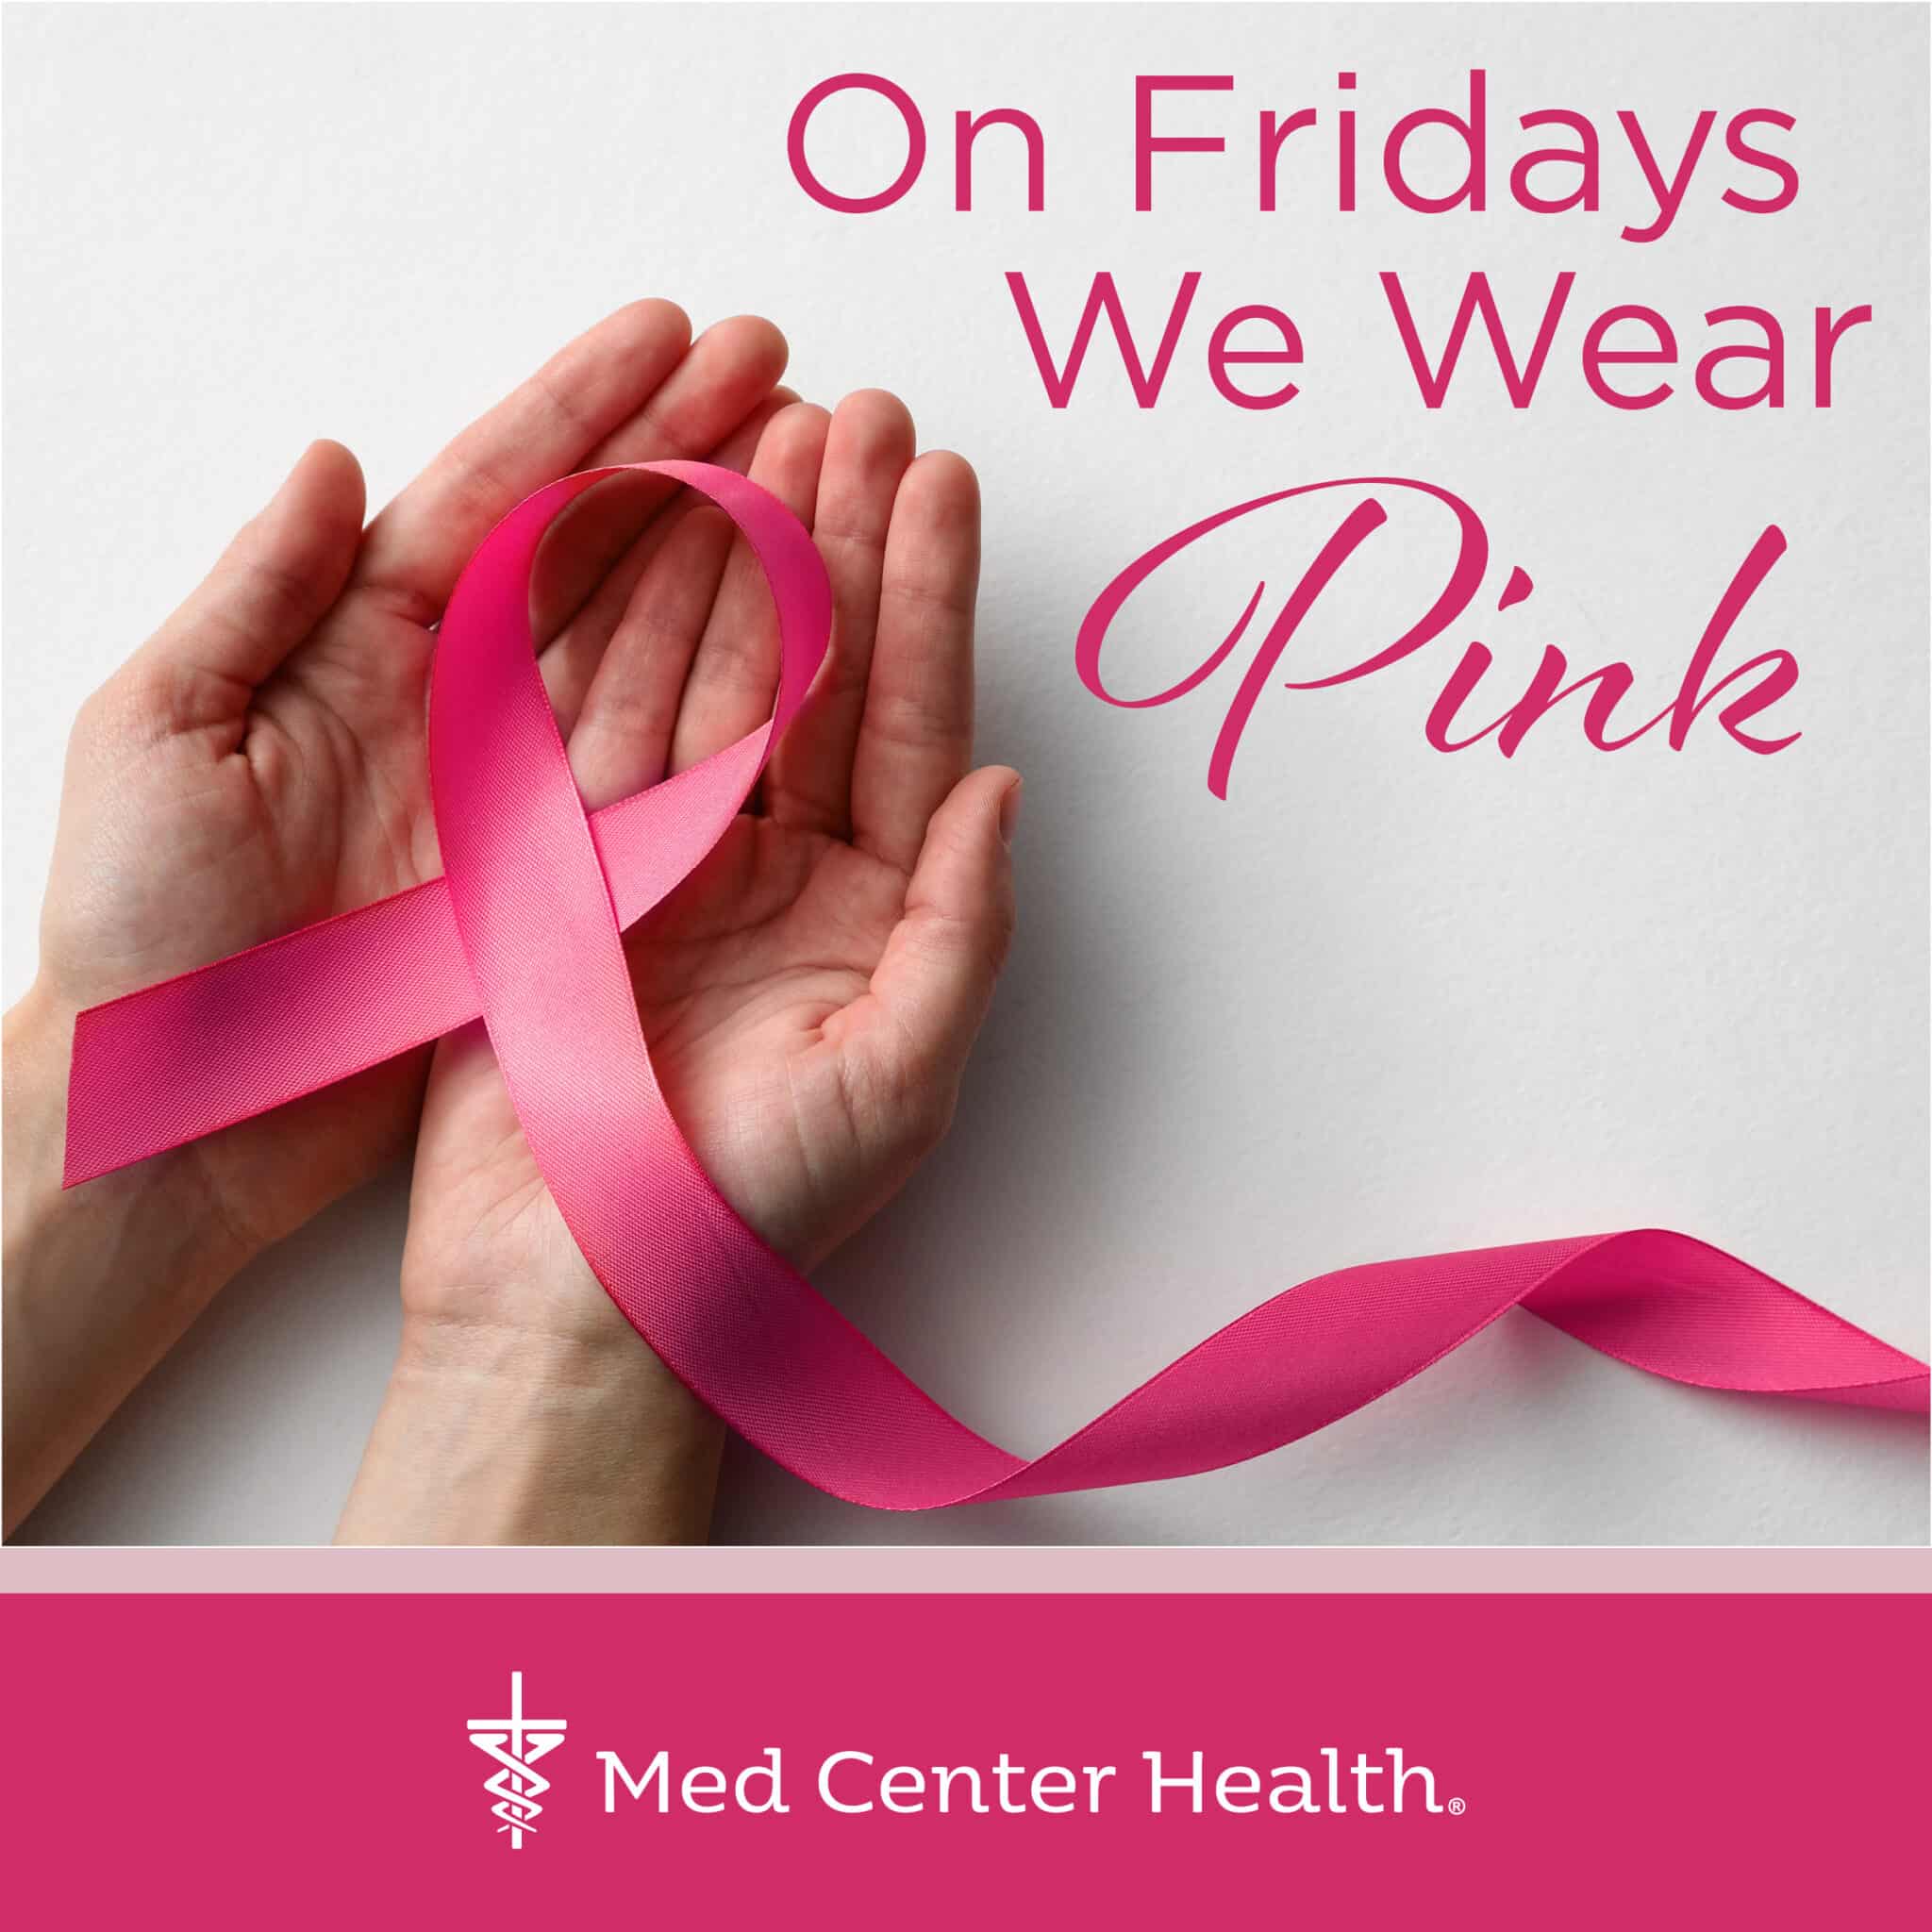 Wear Pink Wednesdays! WXII 12 joins fight against breast cancer